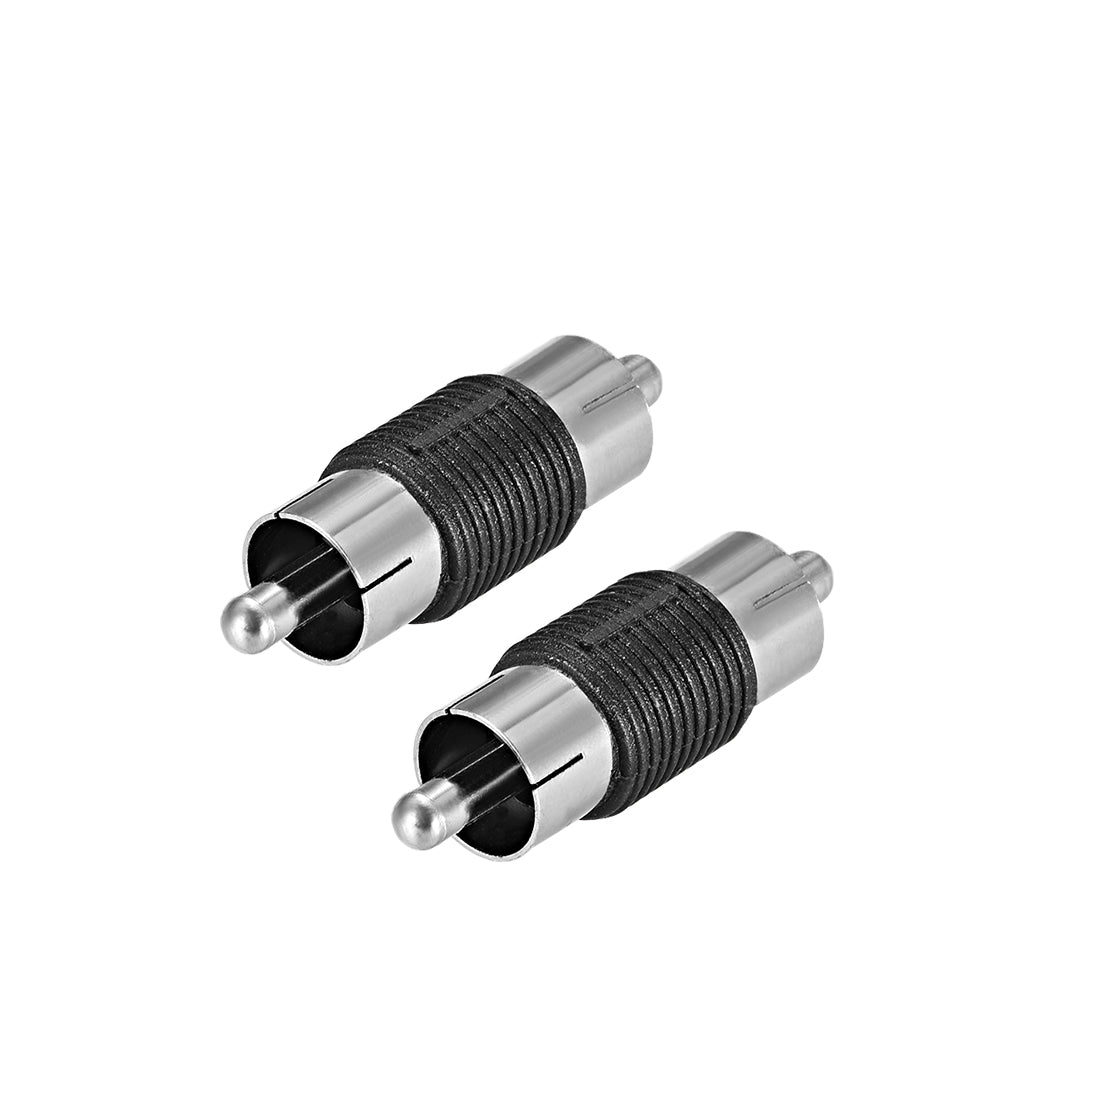 uxcell Uxcell RCA Male to Male Connector Adapter Coupler for Stereo Audio Video AV TV Cable Convert 2Pcs